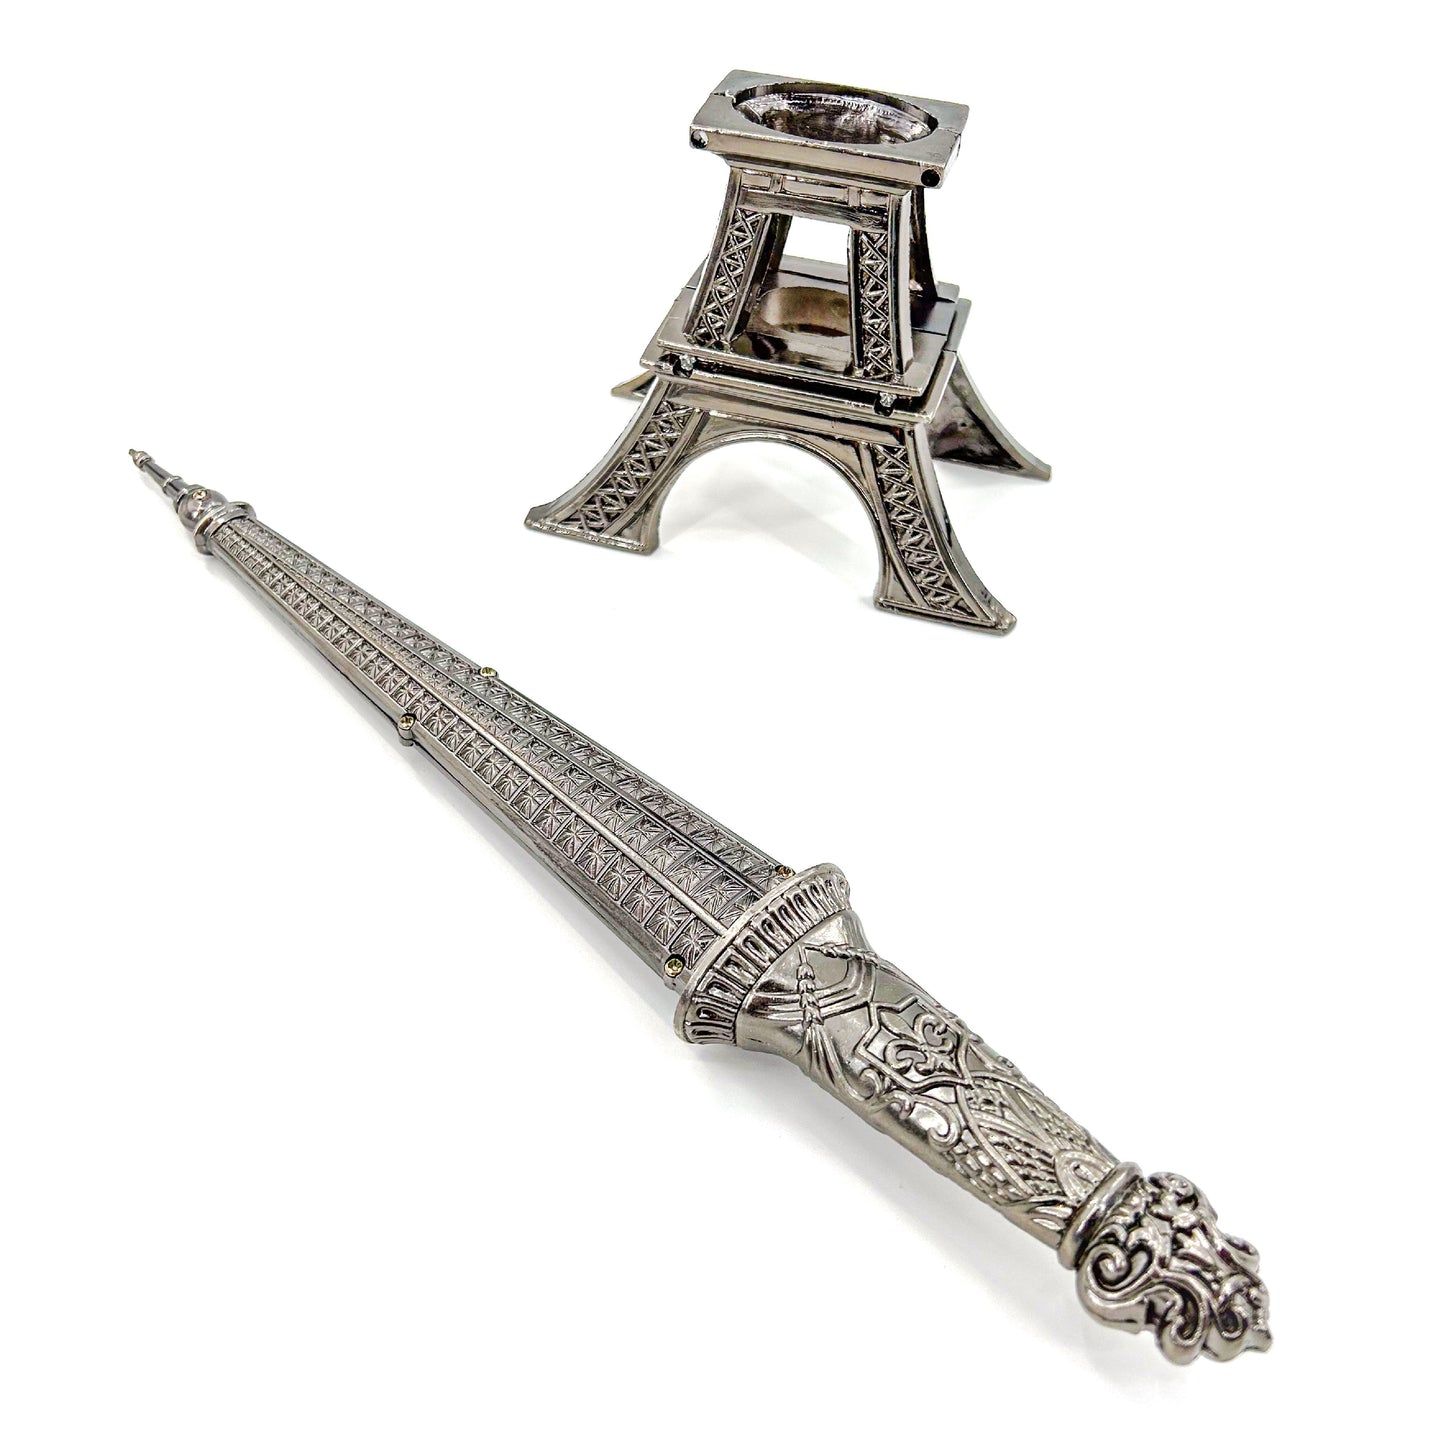 Eiffel Tower Executive Letter Opener-2